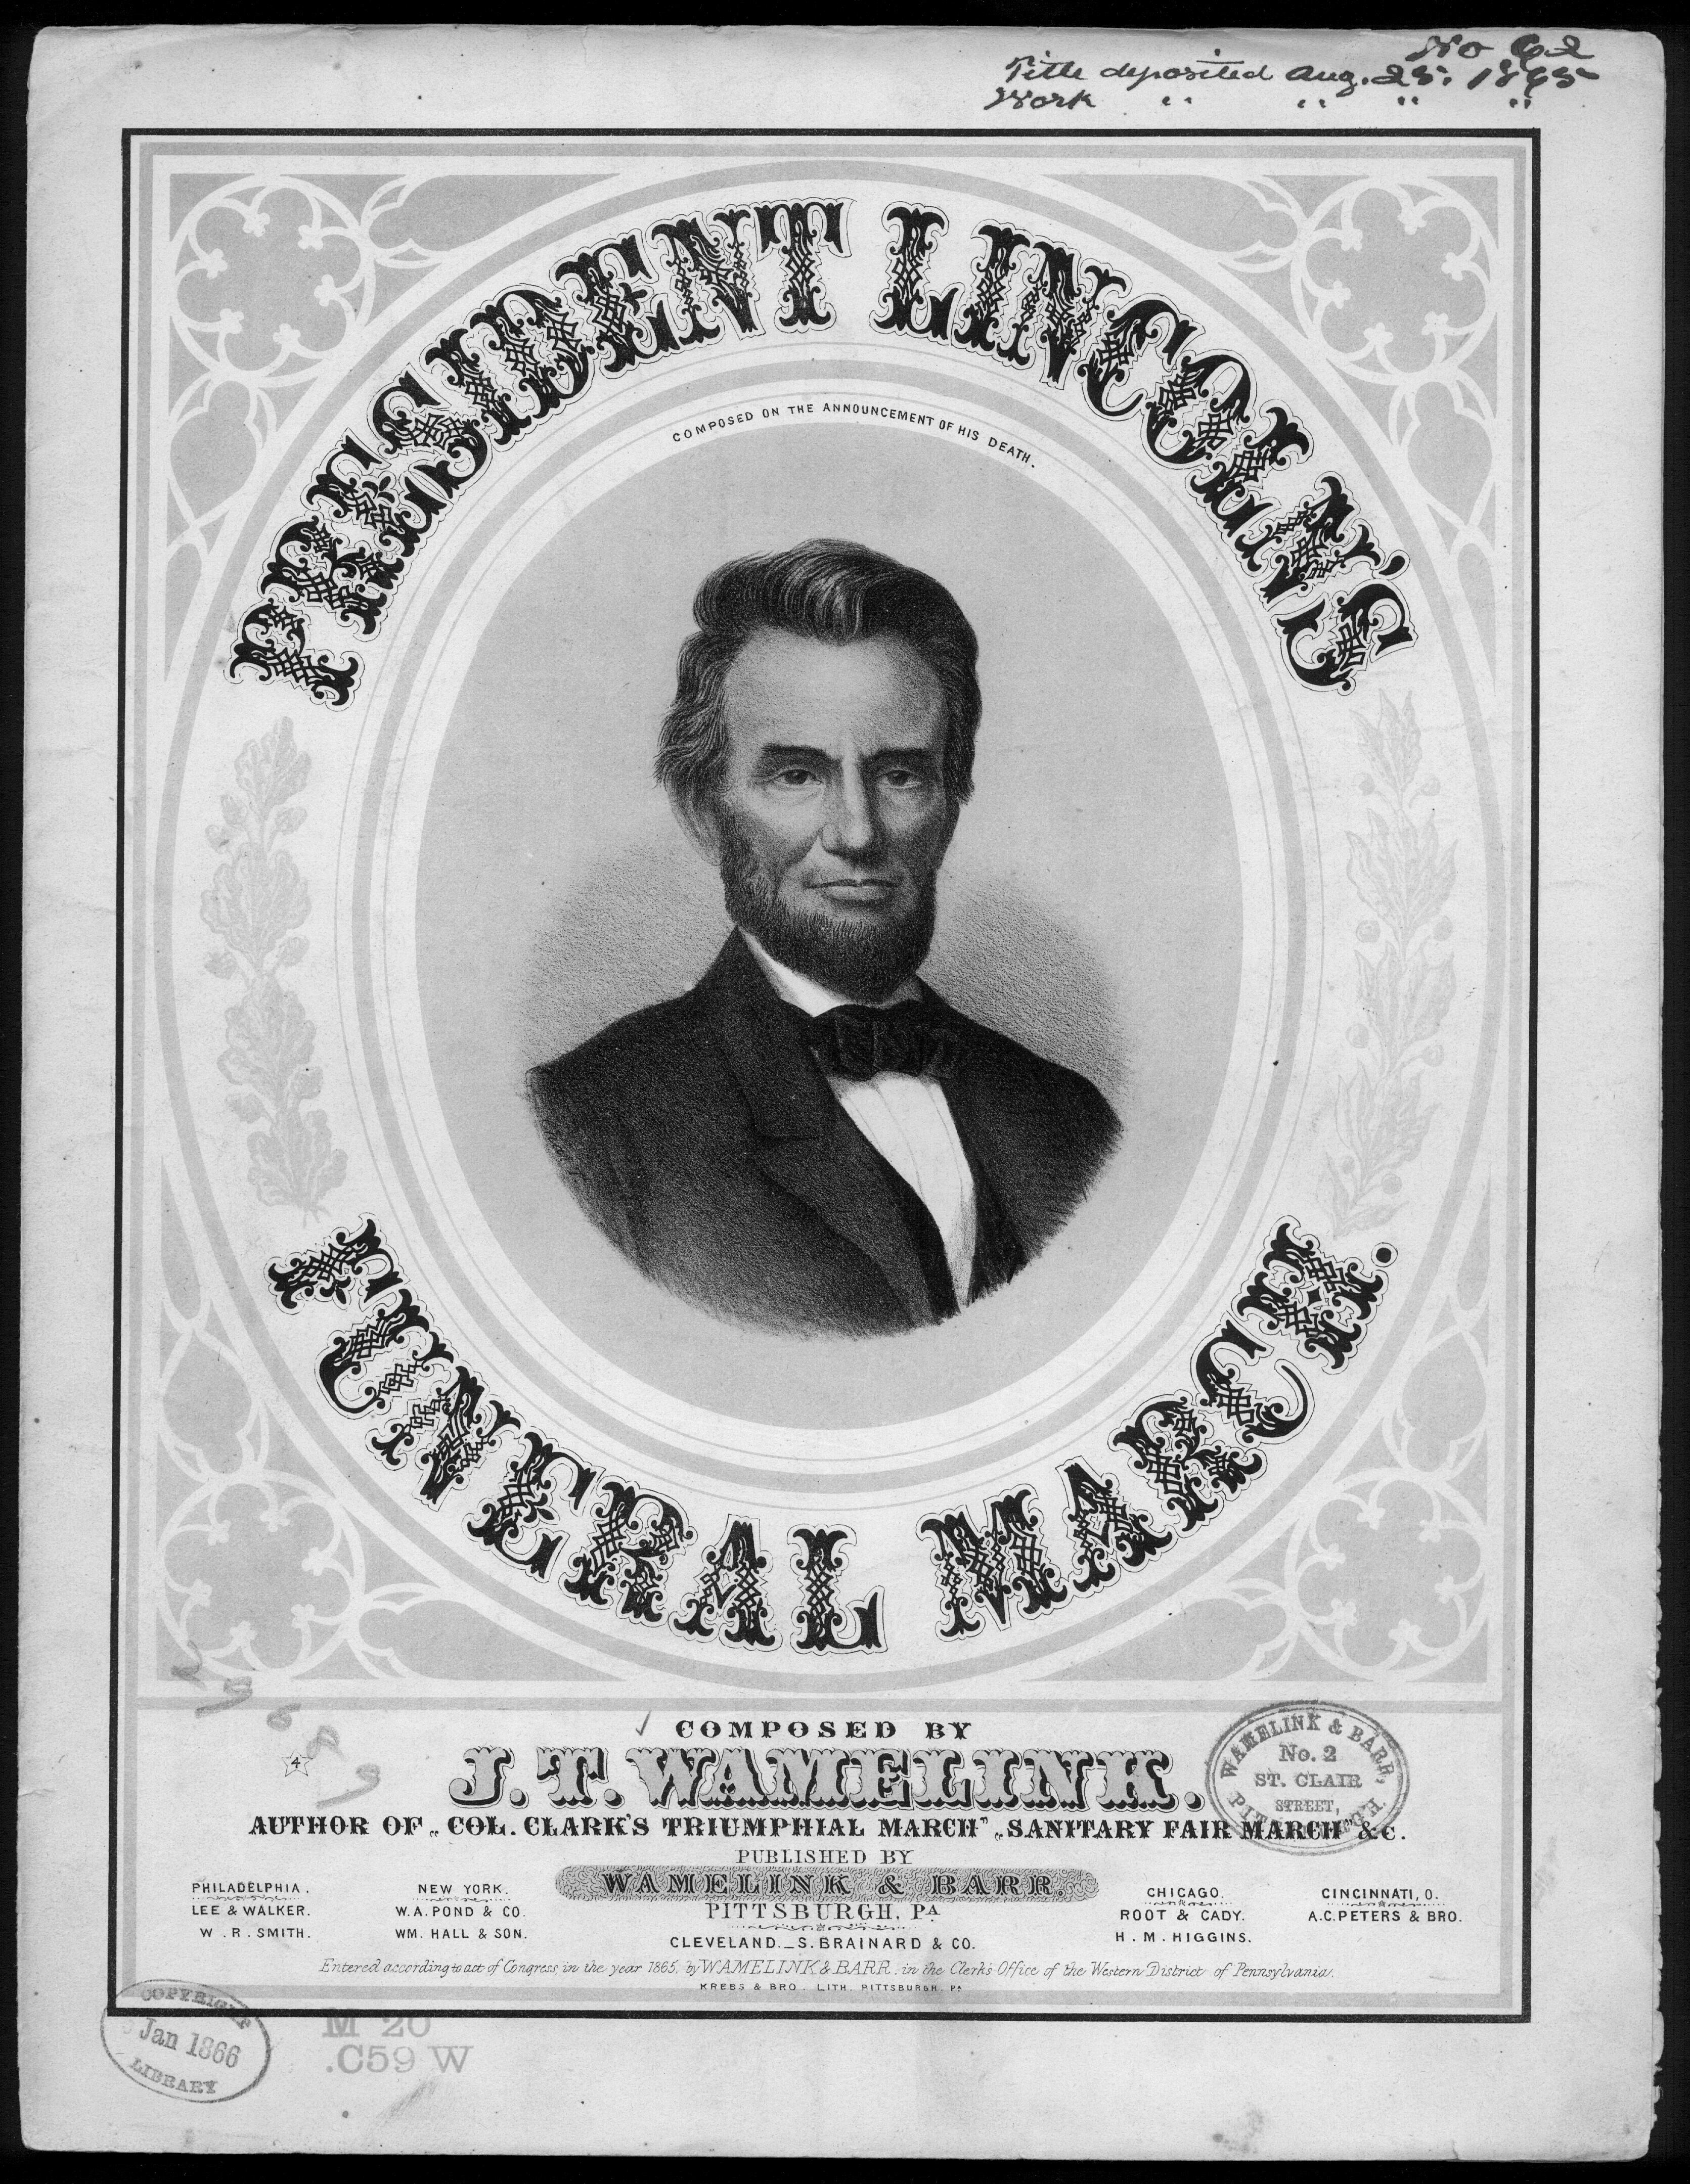 President Lincoln's funeral march